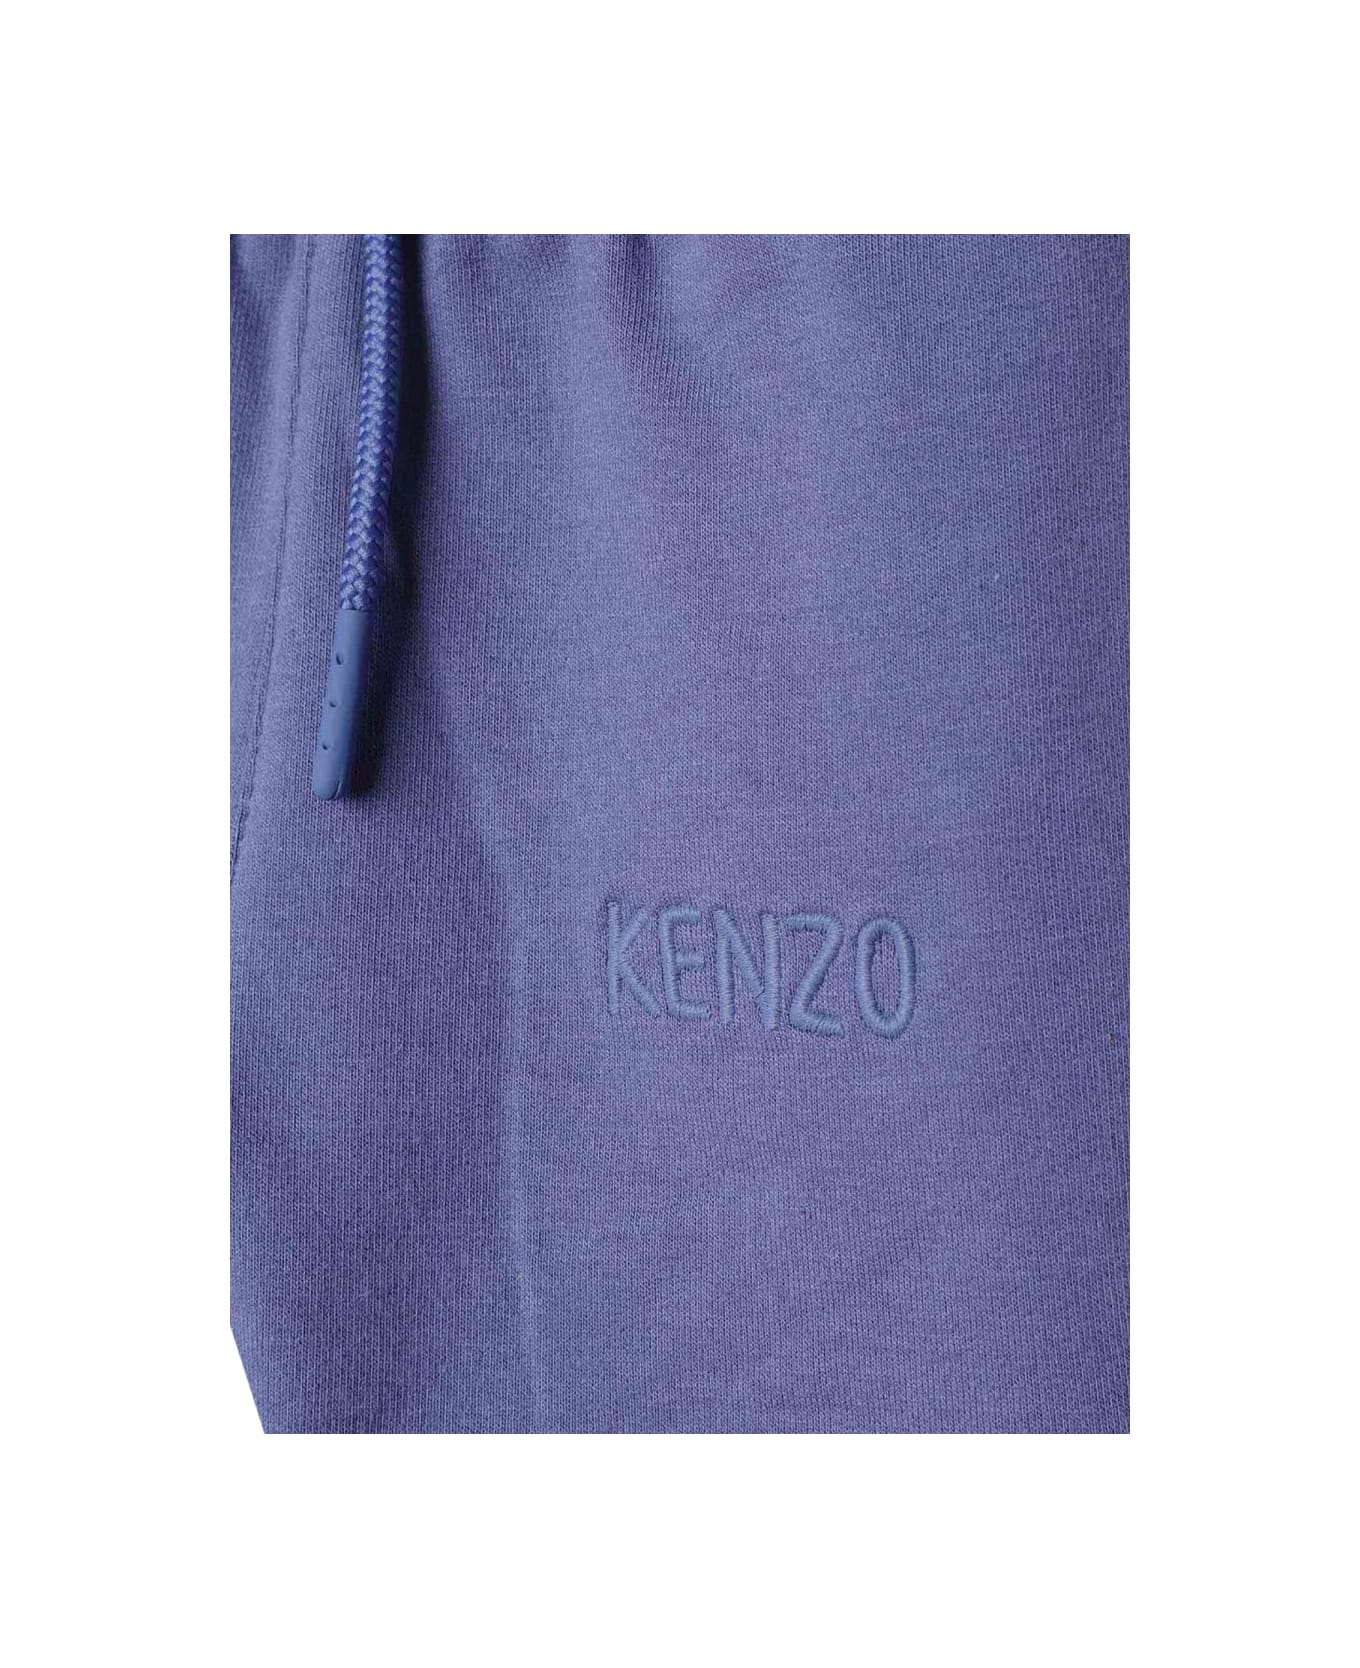 Kenzo Kids Ml T-shirt And Jogger Set - BABY BLUE ボディスーツ＆セットアップ